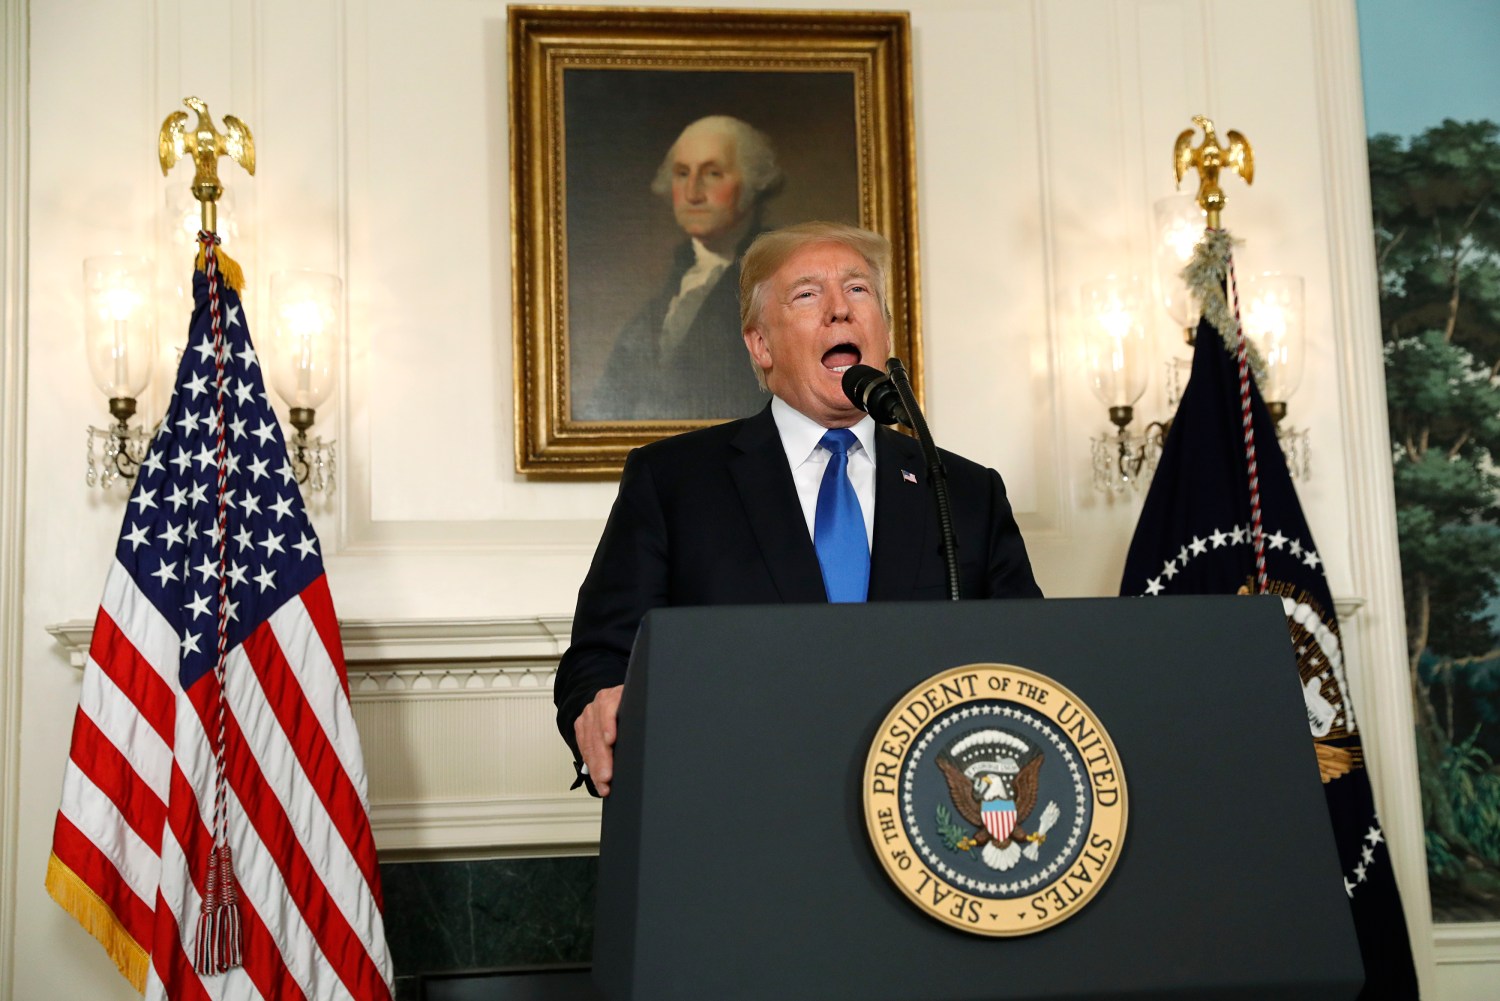 U.S. President Donald Trump speaks about Iran and the Iran nuclear deal in the Diplomatic Room of the White House in Washington, U.S., October 13, 2017. REUTERS/Kevin Lamarque - HP1EDAD1B589P